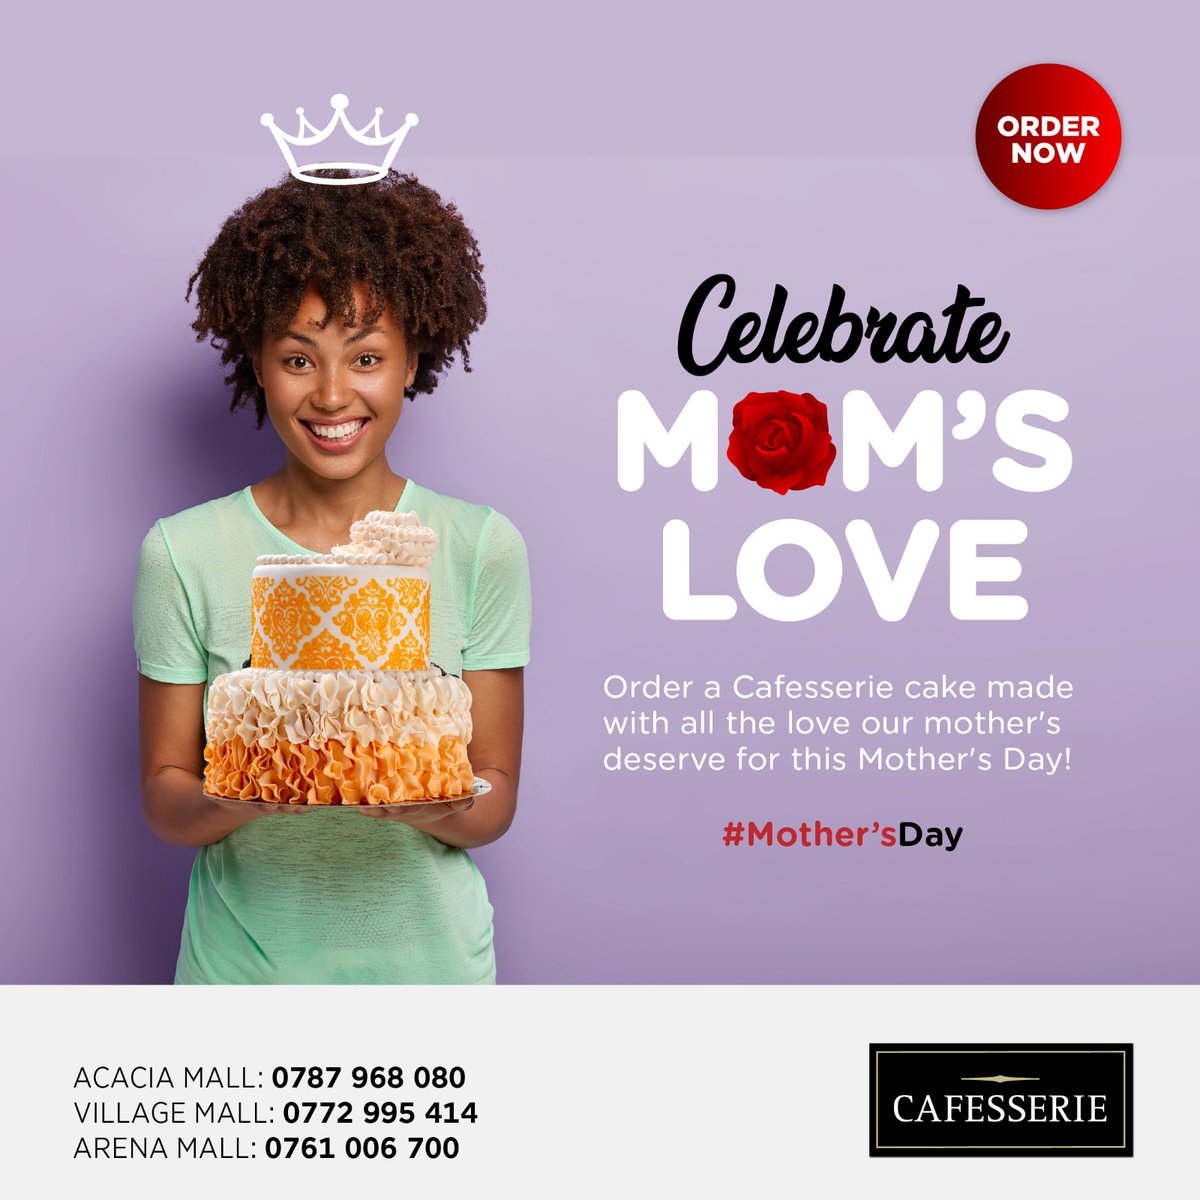 This #MothersDay ,celebrate Mom's #love with a delicious #cake from Cafesserie!🧁🍰🎂 Order a Cafesserie cake made with all the love our mothers deserve. For orders & inquiries, you can contact us on: Acacia Mall 0787-968080, Village Mall 0772-995414 & Arena Mall 0761-006700